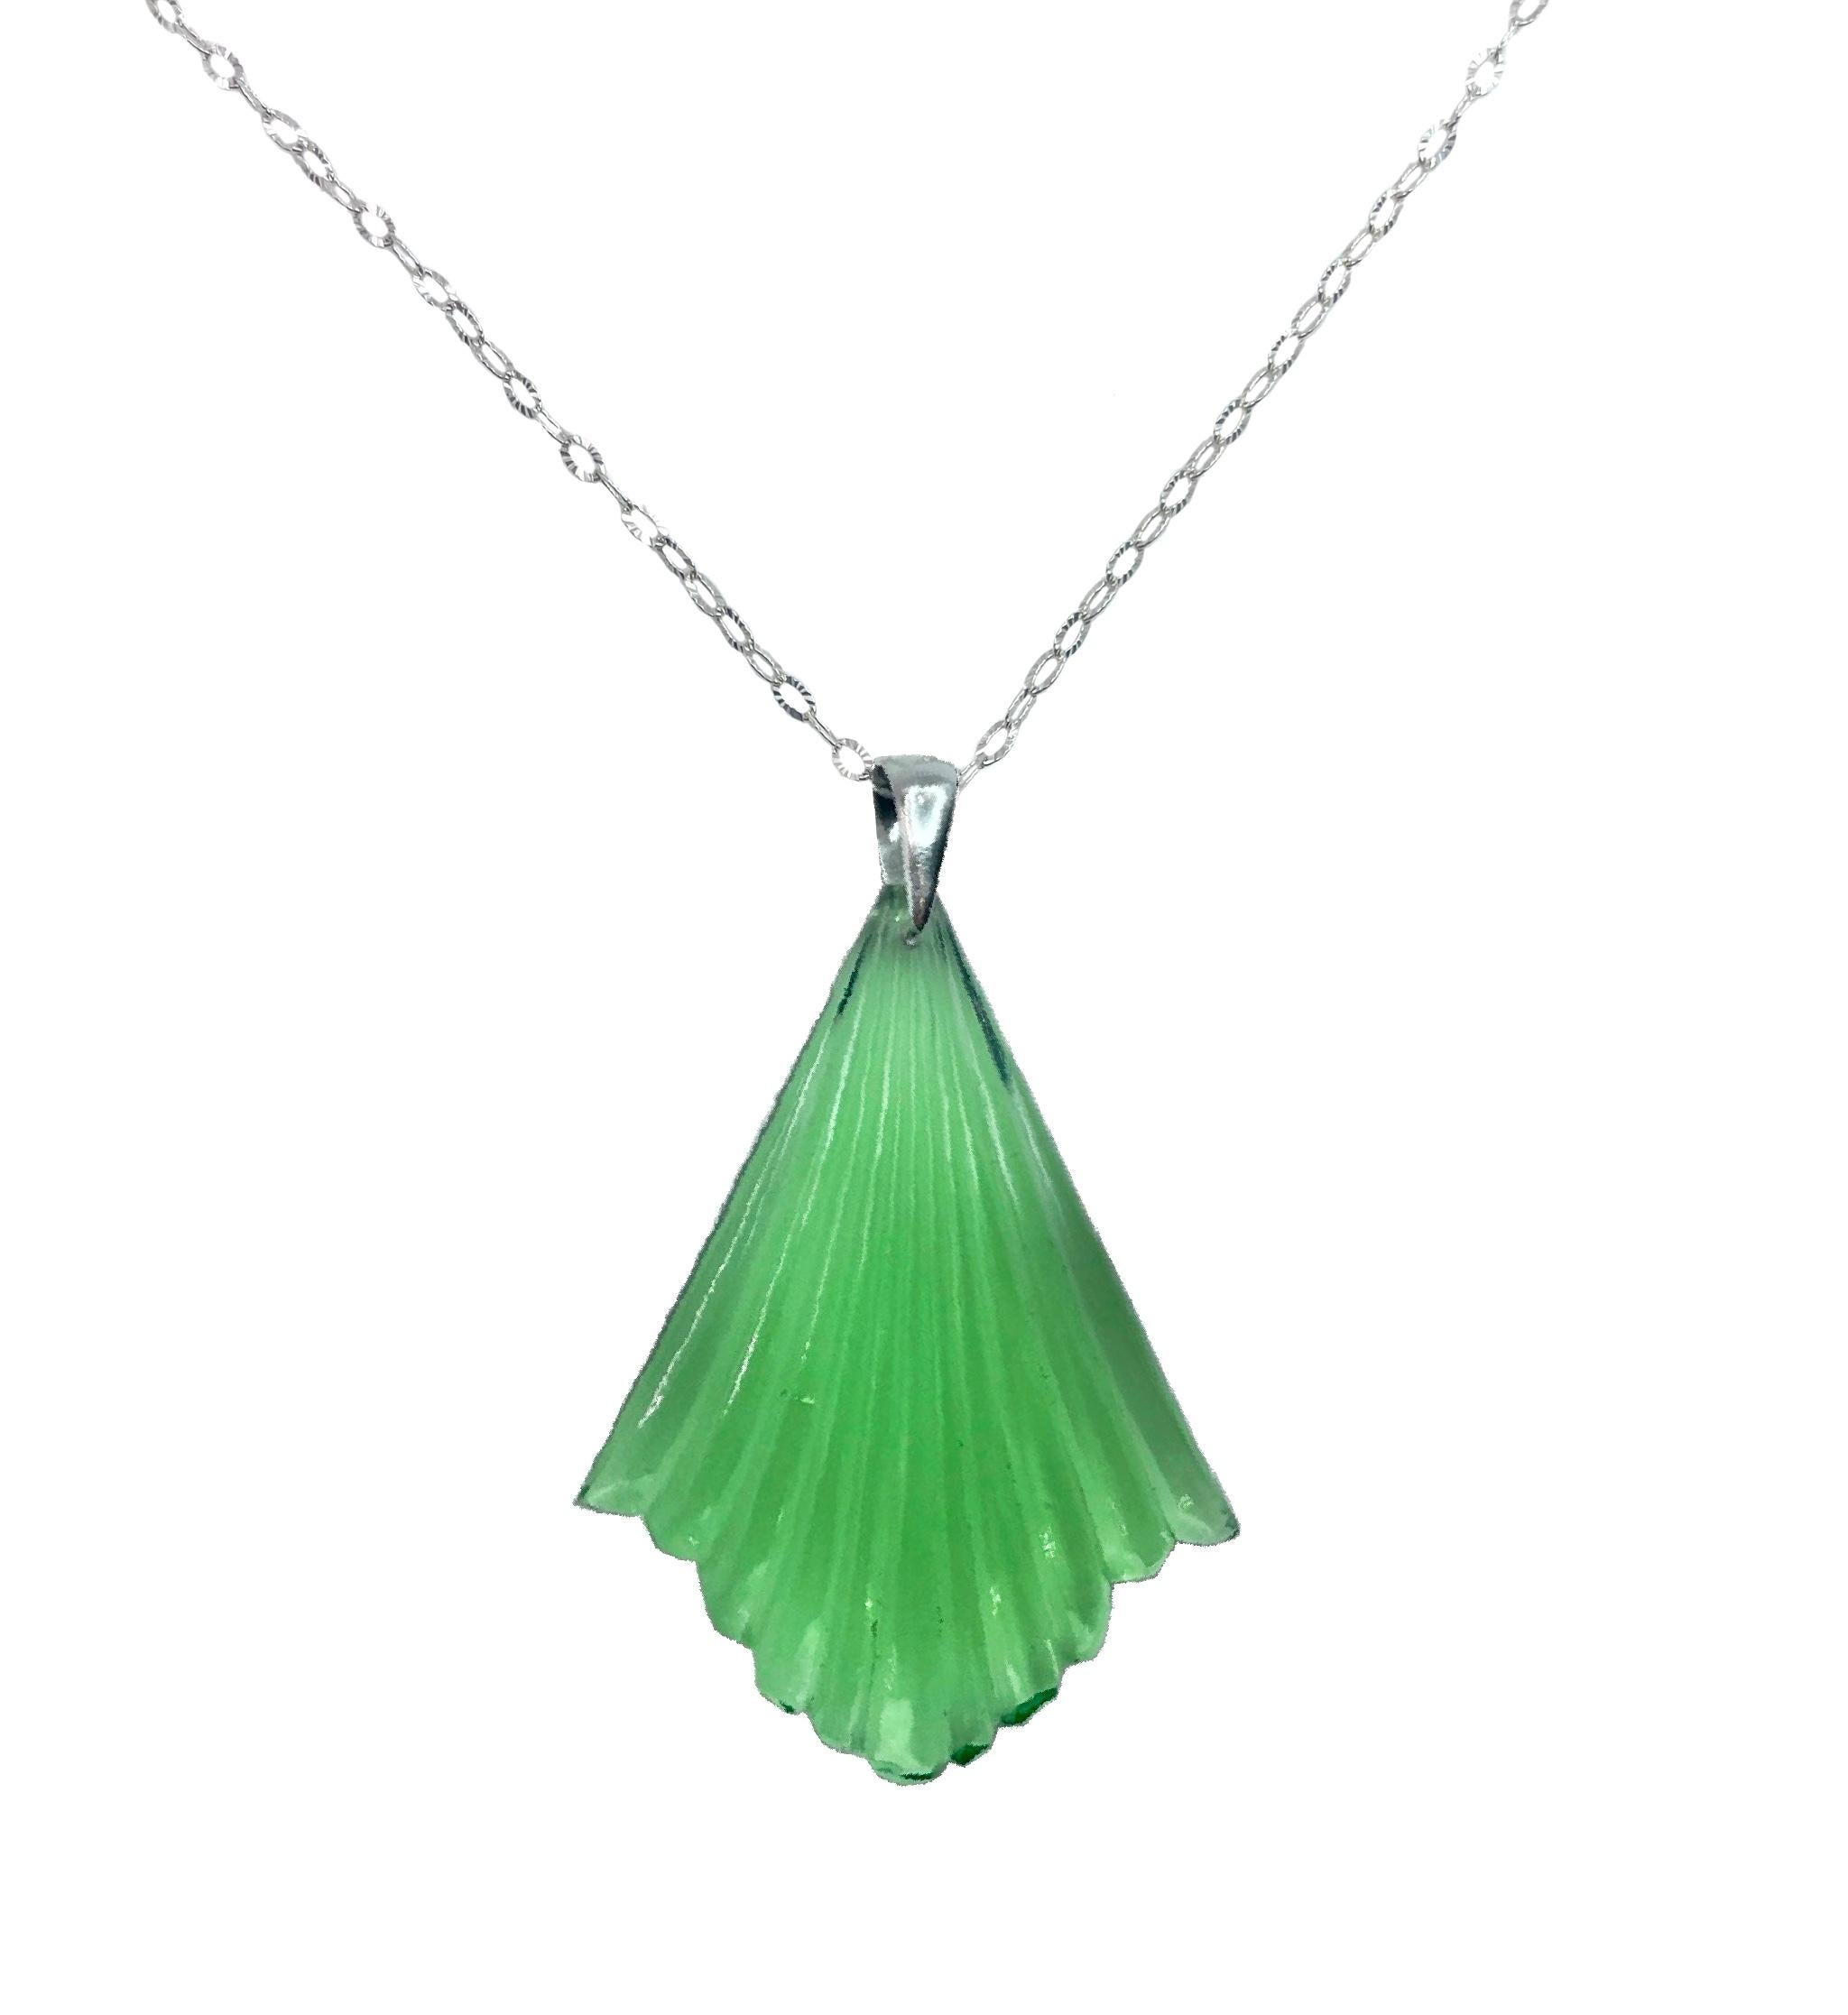 Women's or Men's PONTIEL Art Deco Green Glass Fan with Sterling Silver Chain Pendant Necklace For Sale